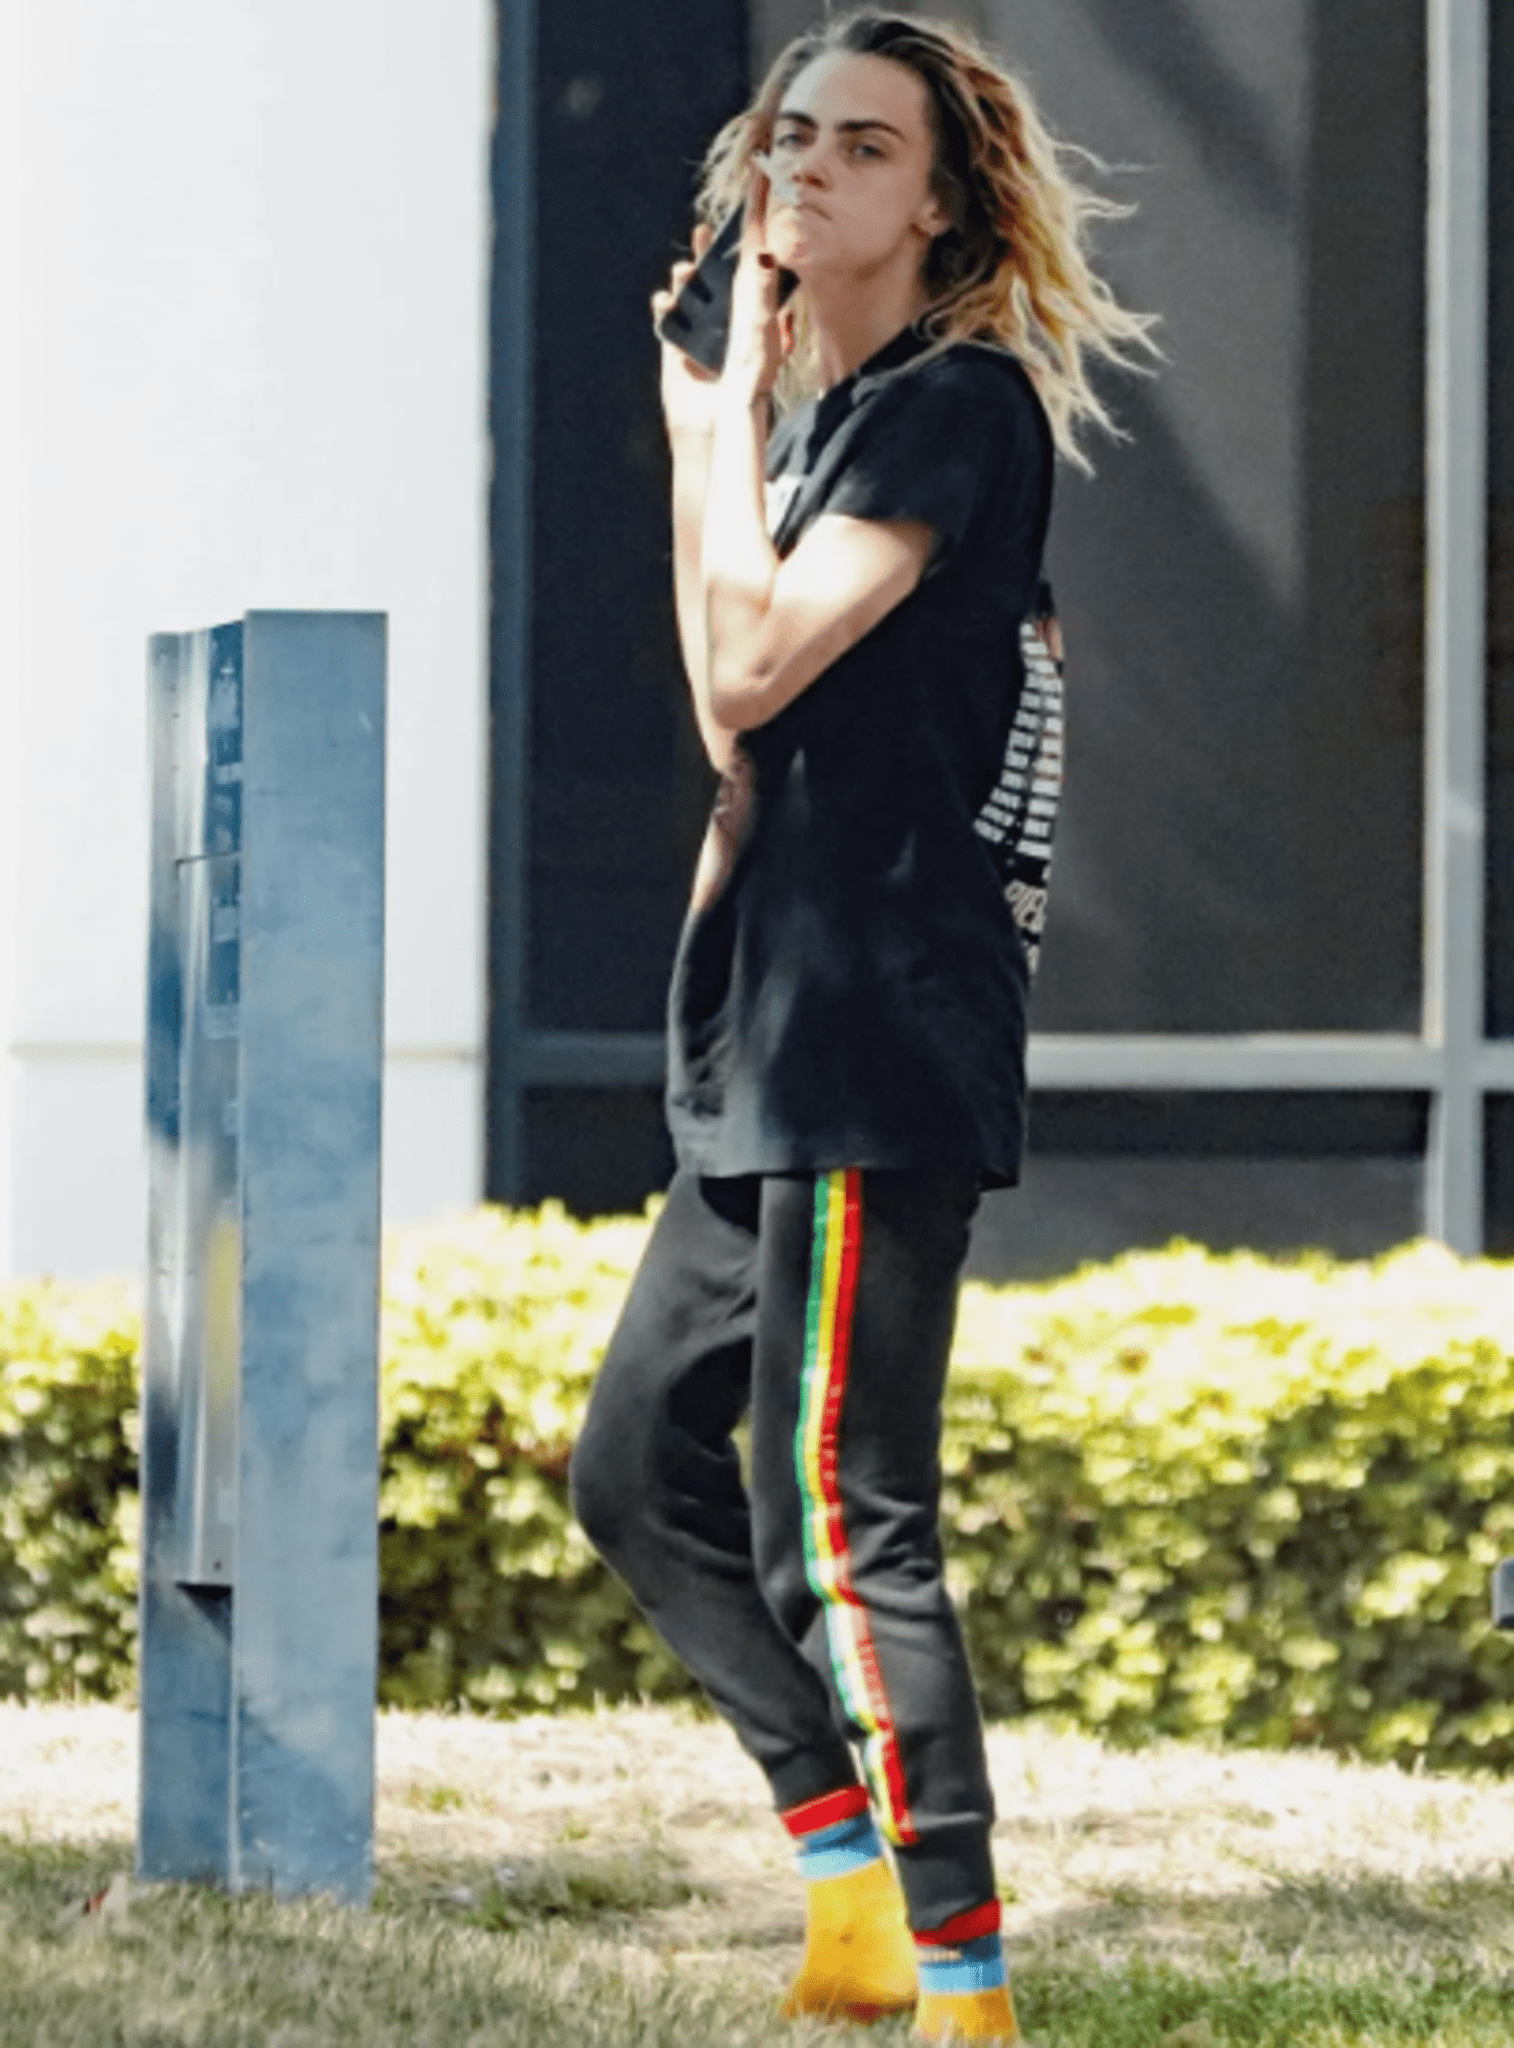 Cara Delevingne, A Supermodel, Removed Her Shoes And Walked Across The Tarmac Wearing Only Orange Socks